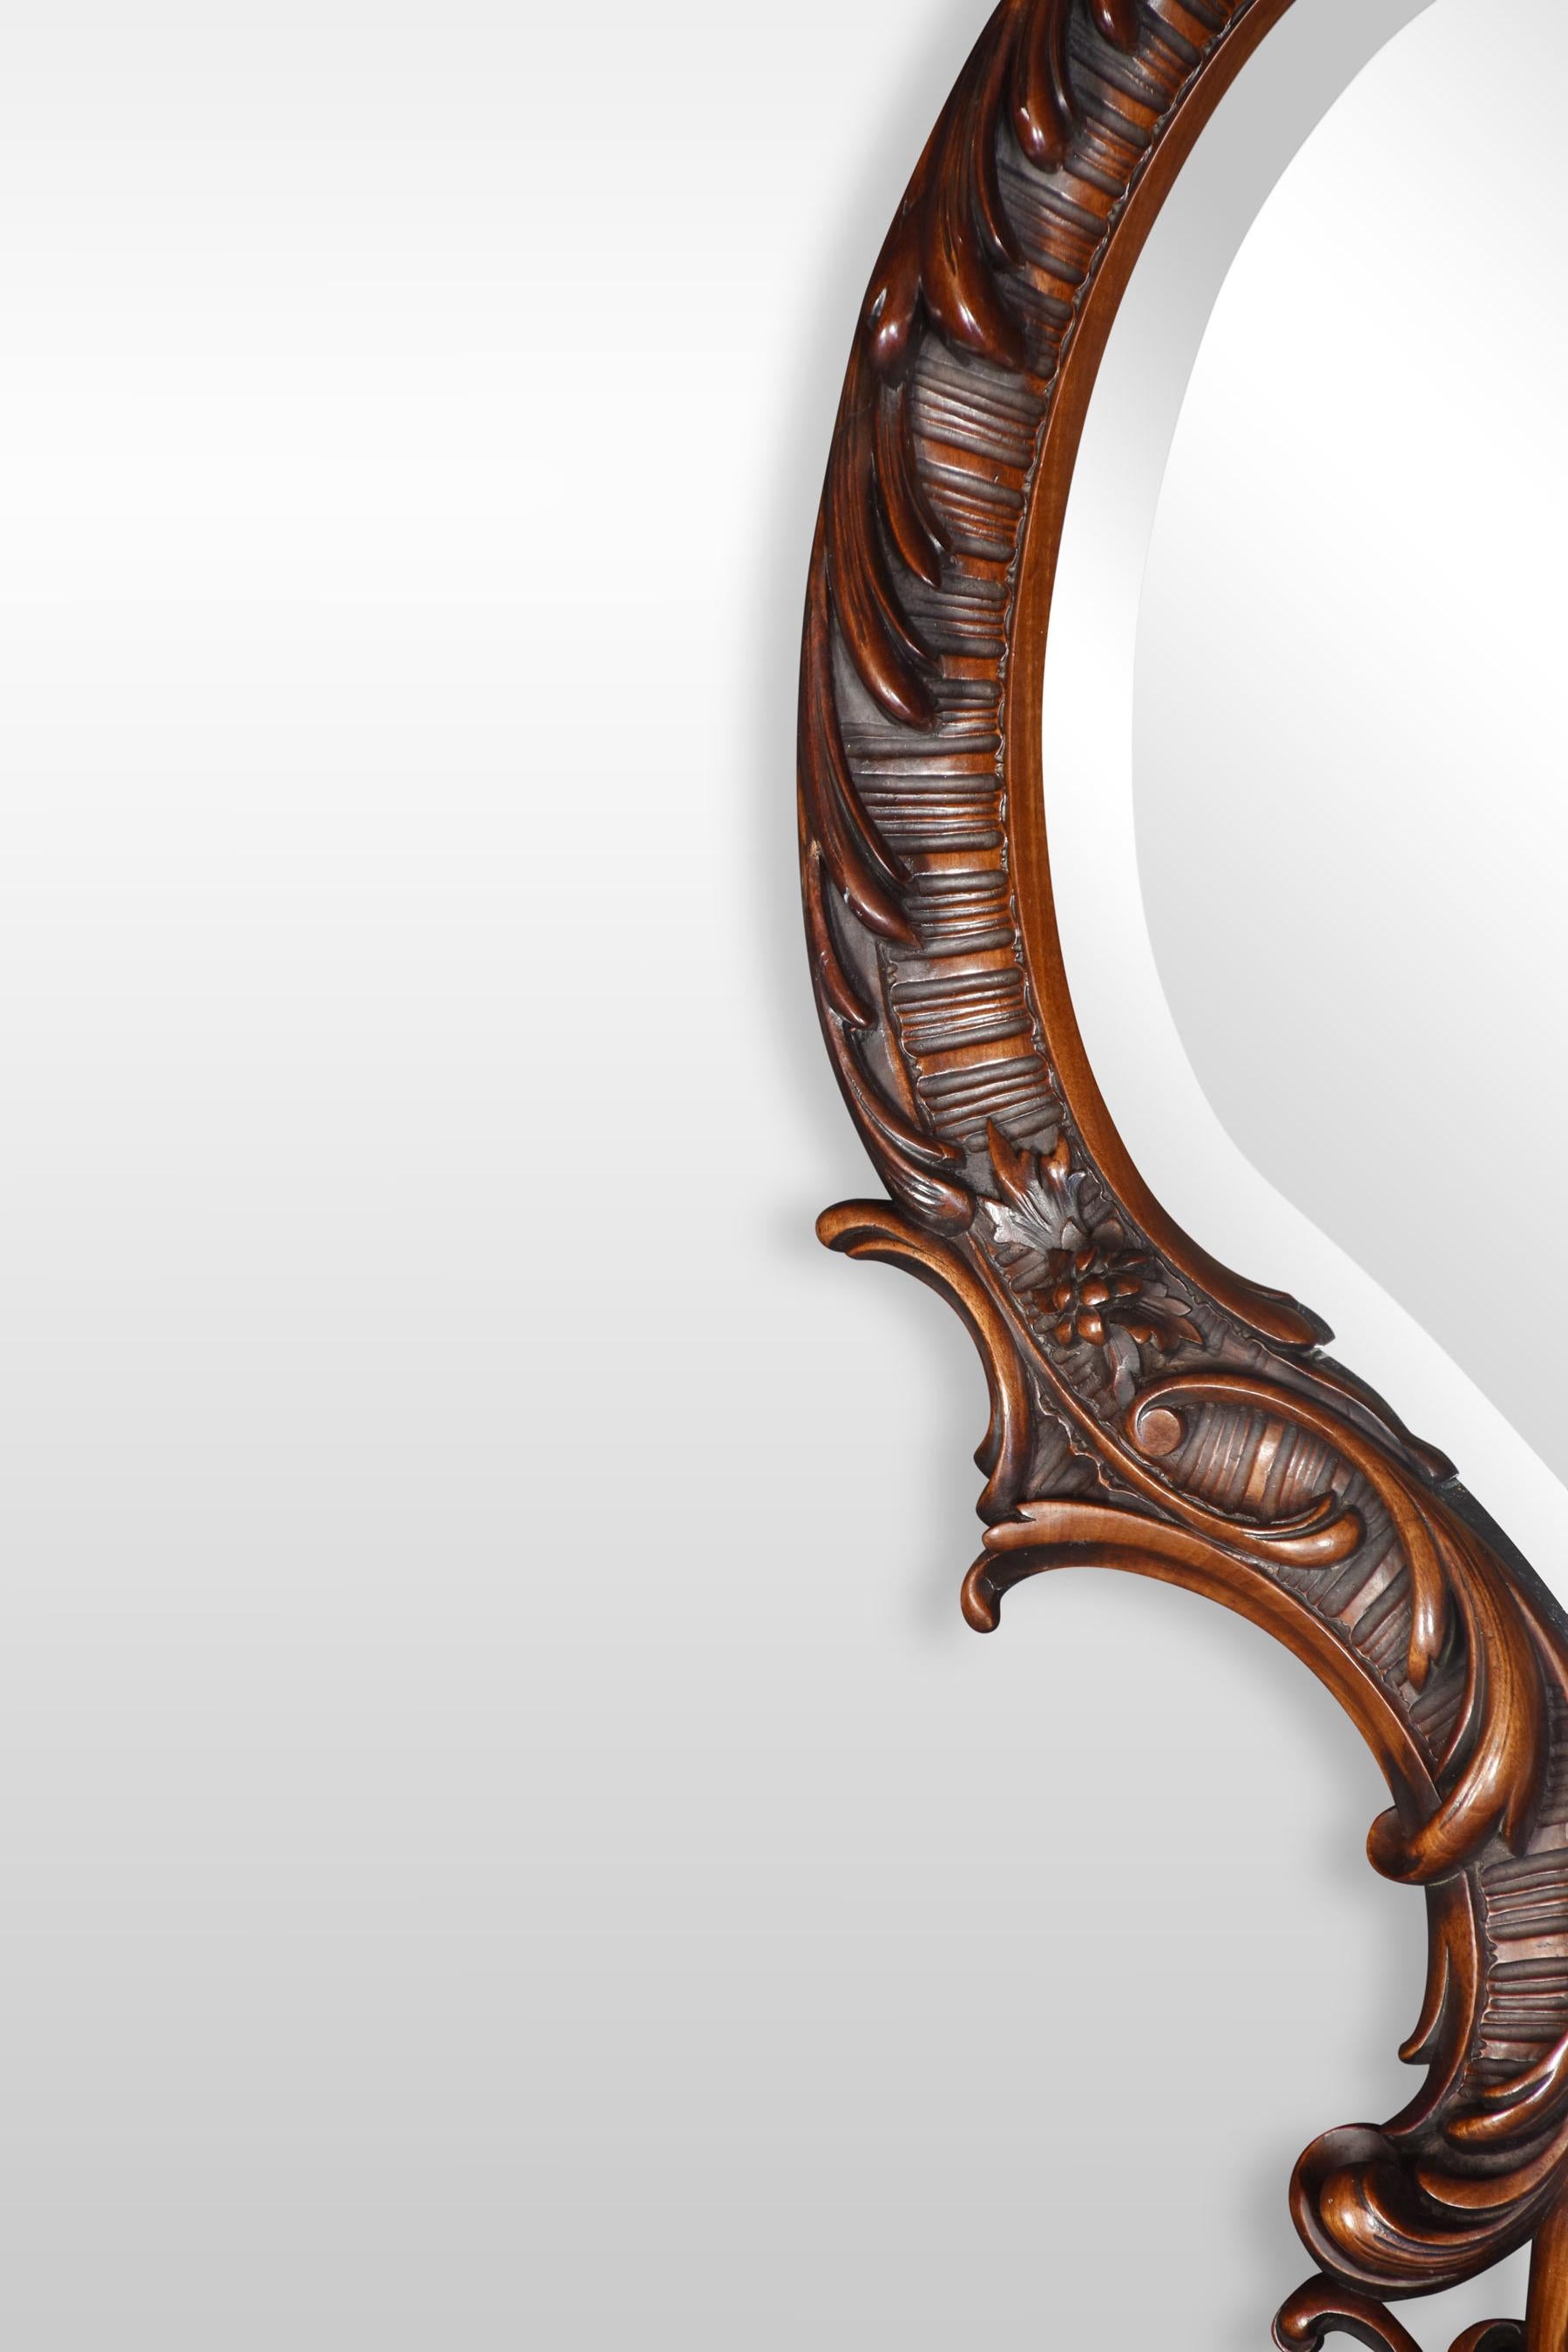 19th century rococo revival mahogany wall mirror, the asymmetrical shape with a beveled glass plate, heavily carved with rocaille scrolls and foliate details.
Dimensions
Height 49 inches
Width 23 inches
Depth 6.5 inches.